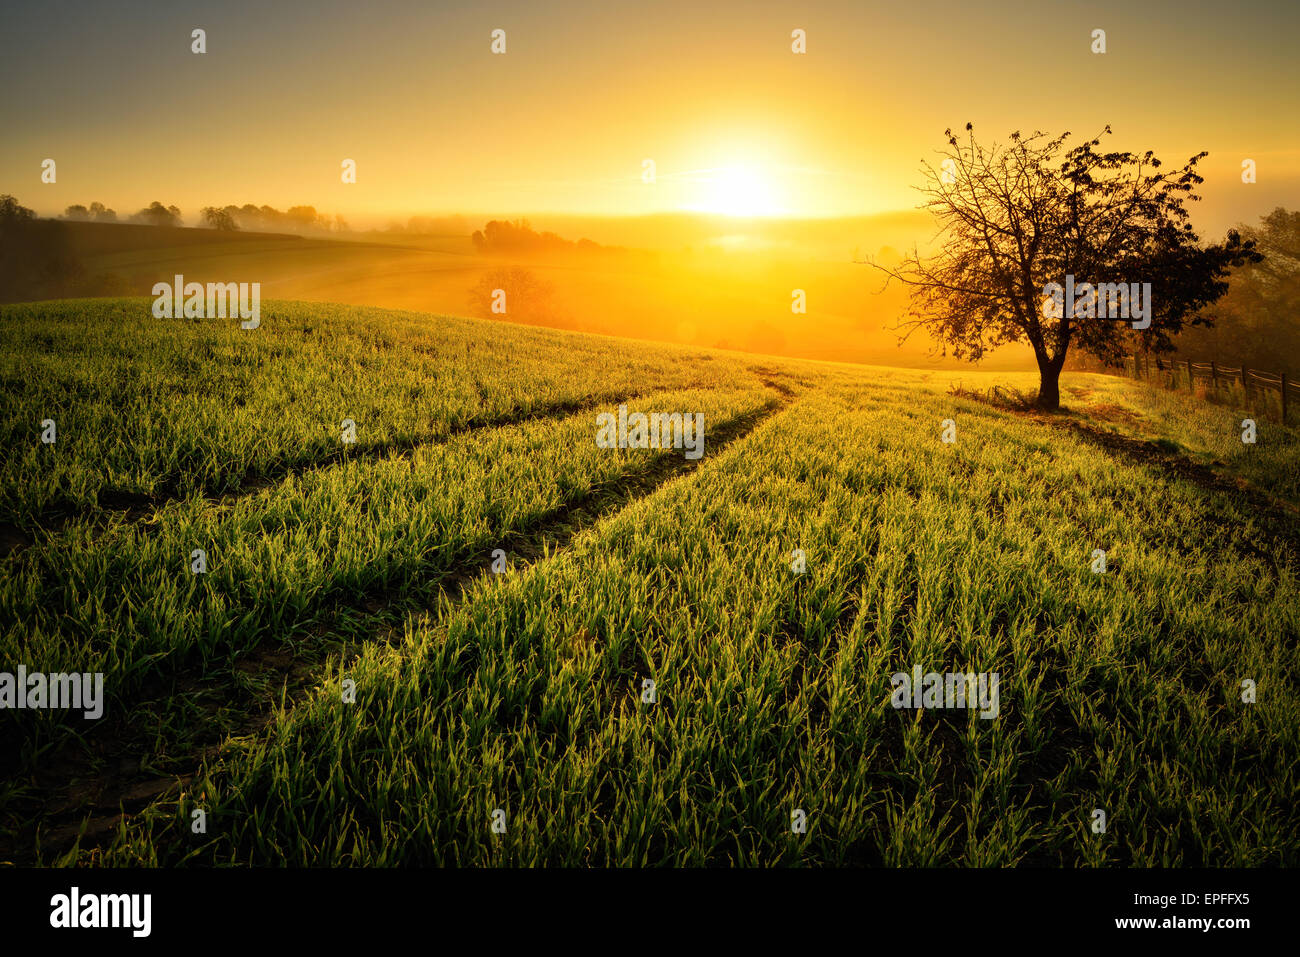 Rural landscape with a hill and a single tree at sunrise with warm light, trails in the meadow leading to the golden sun Stock Photo